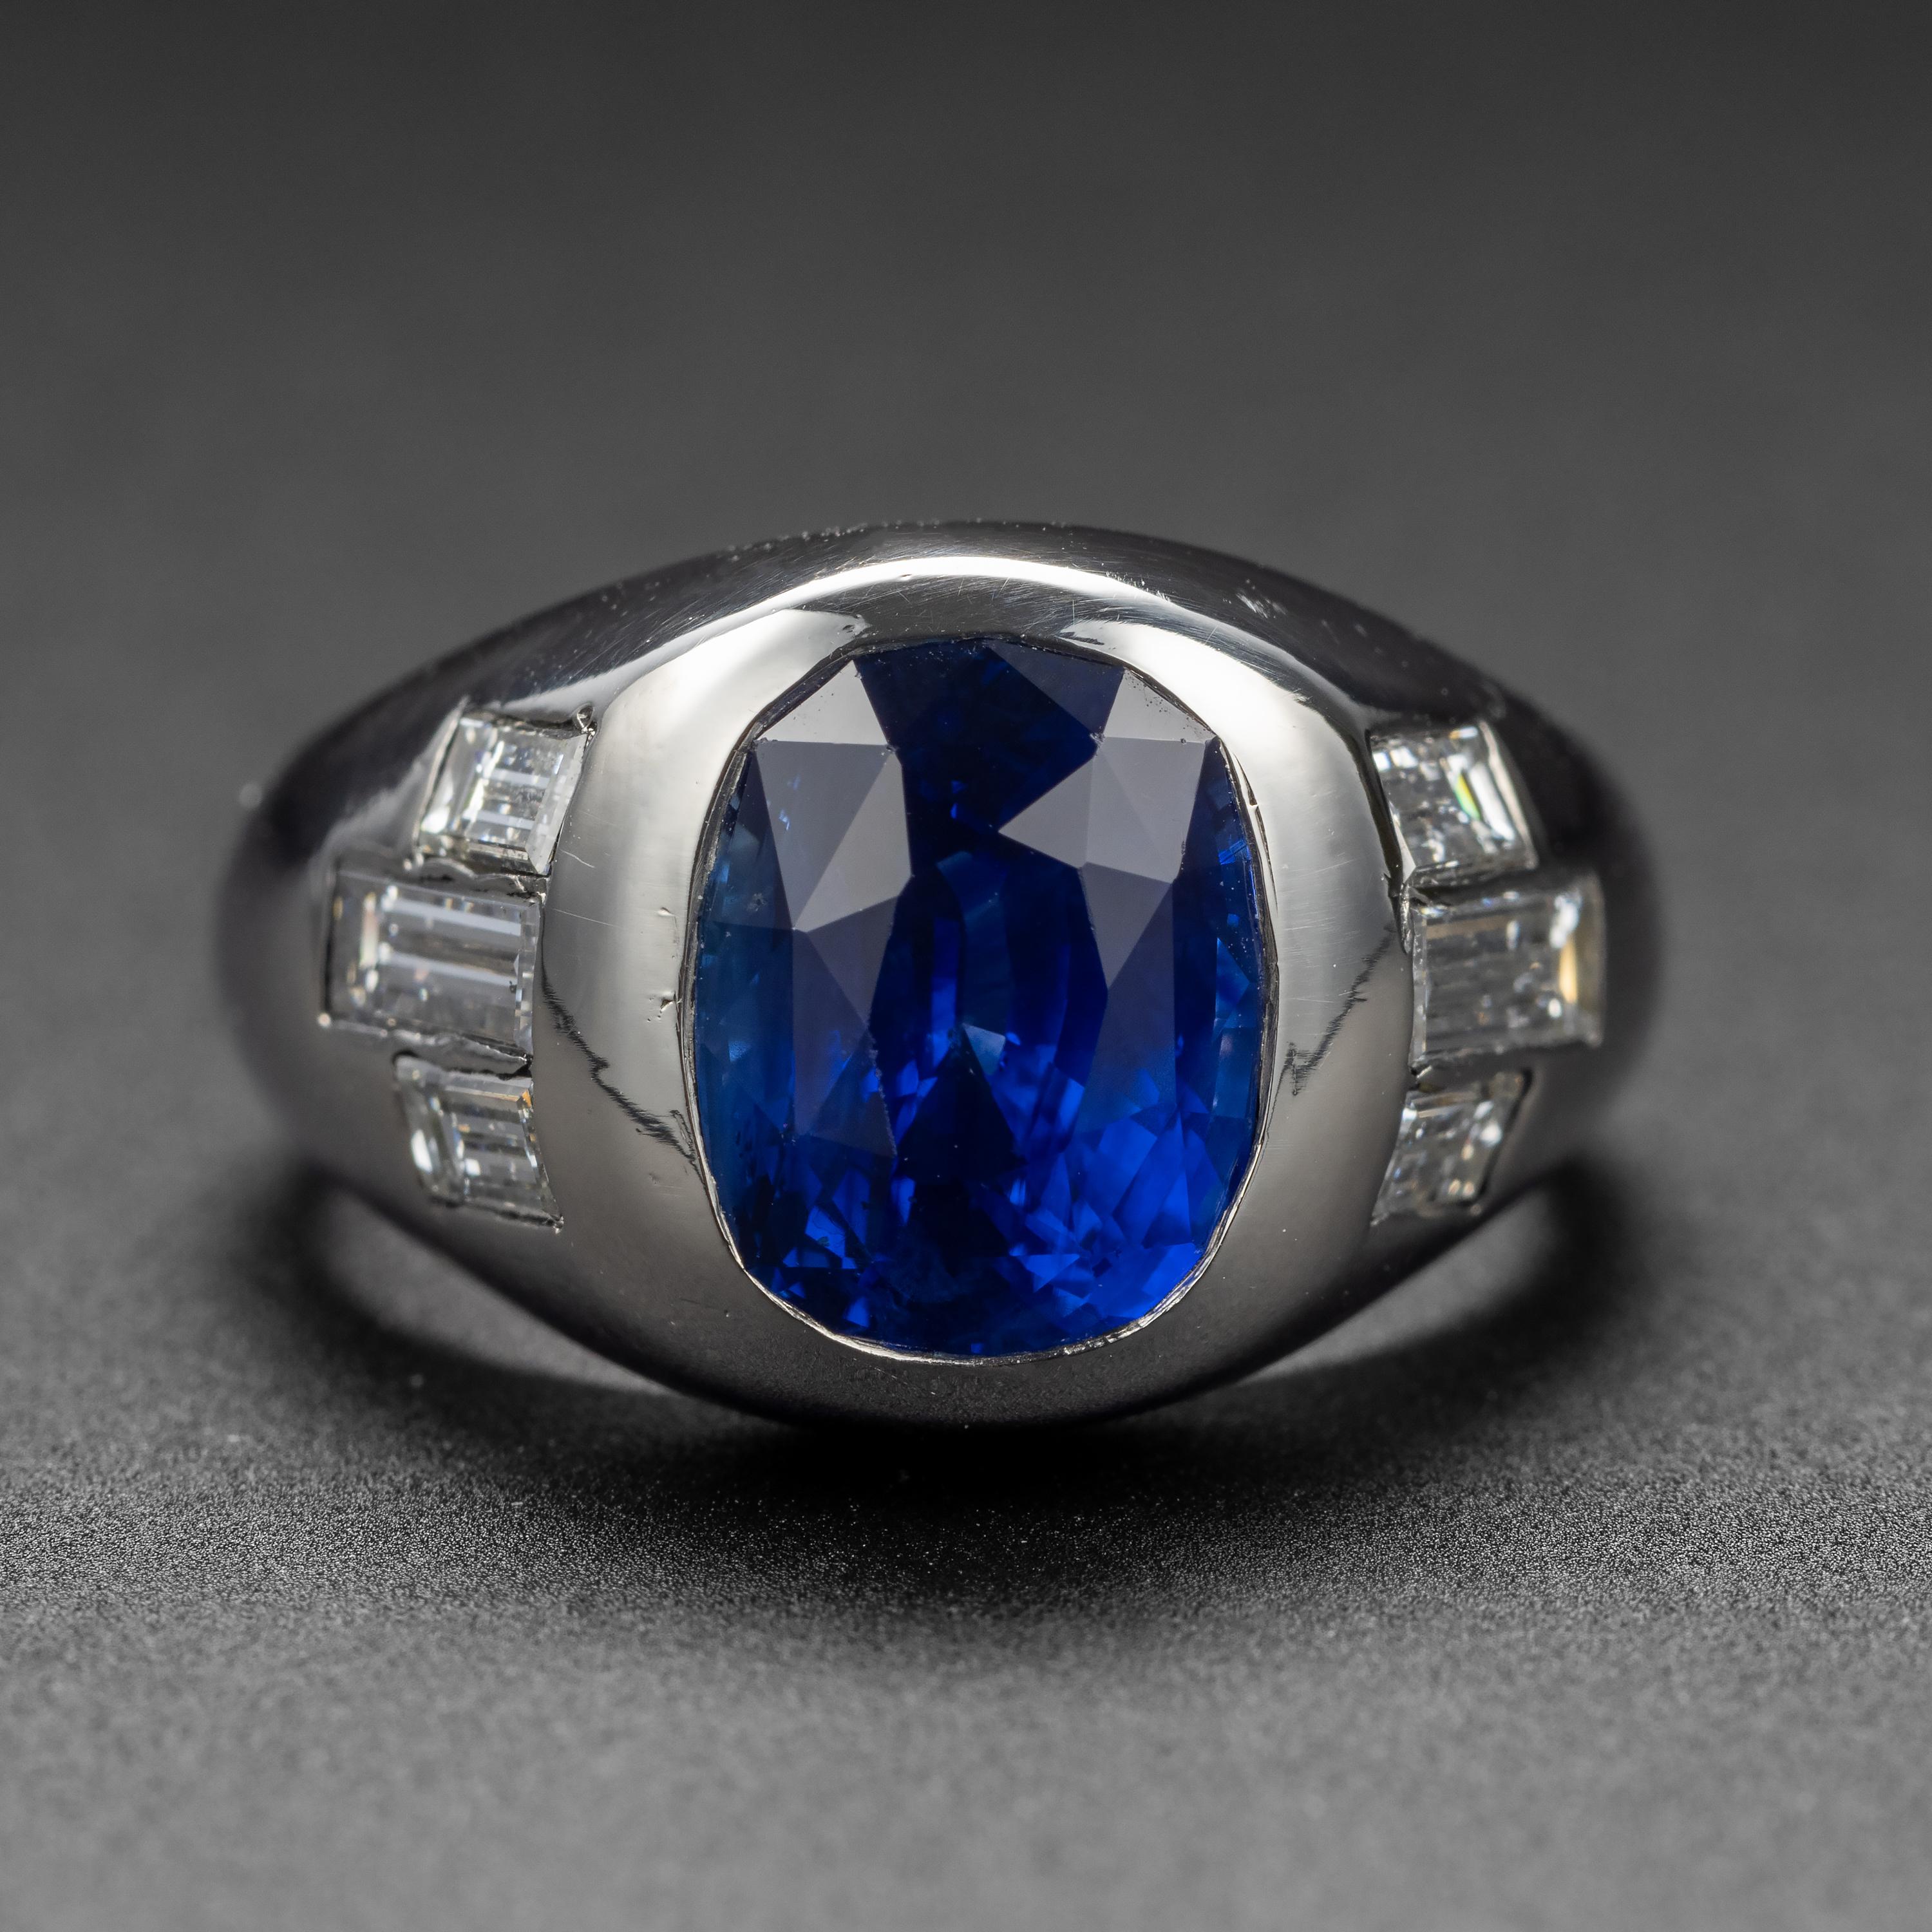 This sleek and impressive ring is the very epitome of Mid-century style. Originally created for a man, this ring could obviously be worn by anyone who appreciates the sleek, aerodynamic lines and vivid royal blue of the gem. 

This certified